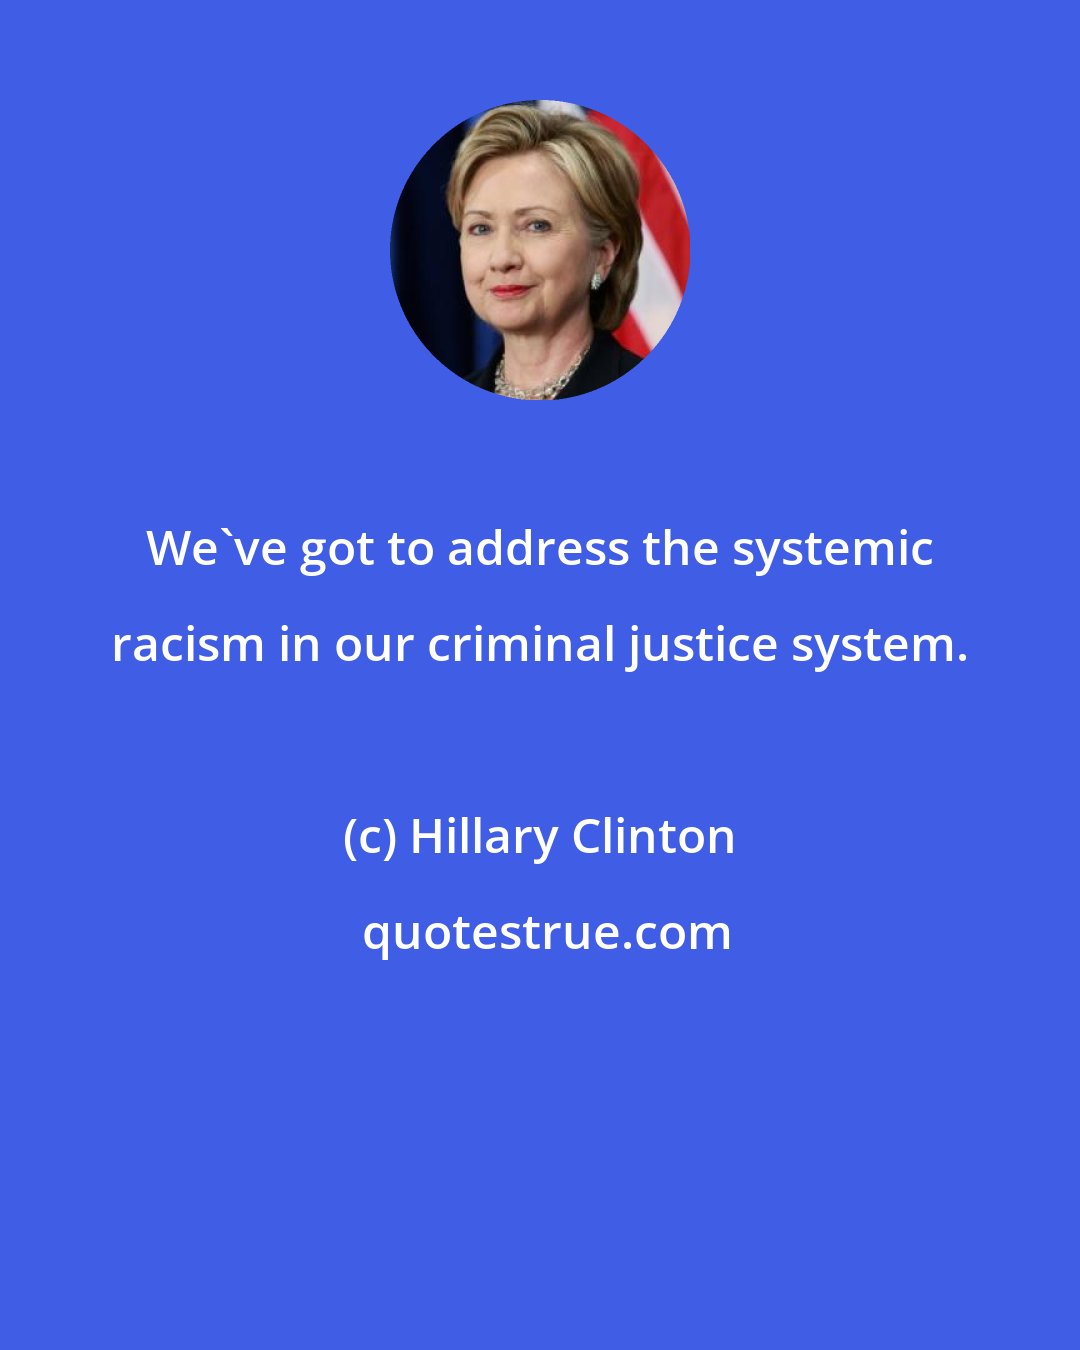 Hillary Clinton: We've got to address the systemic racism in our criminal justice system.